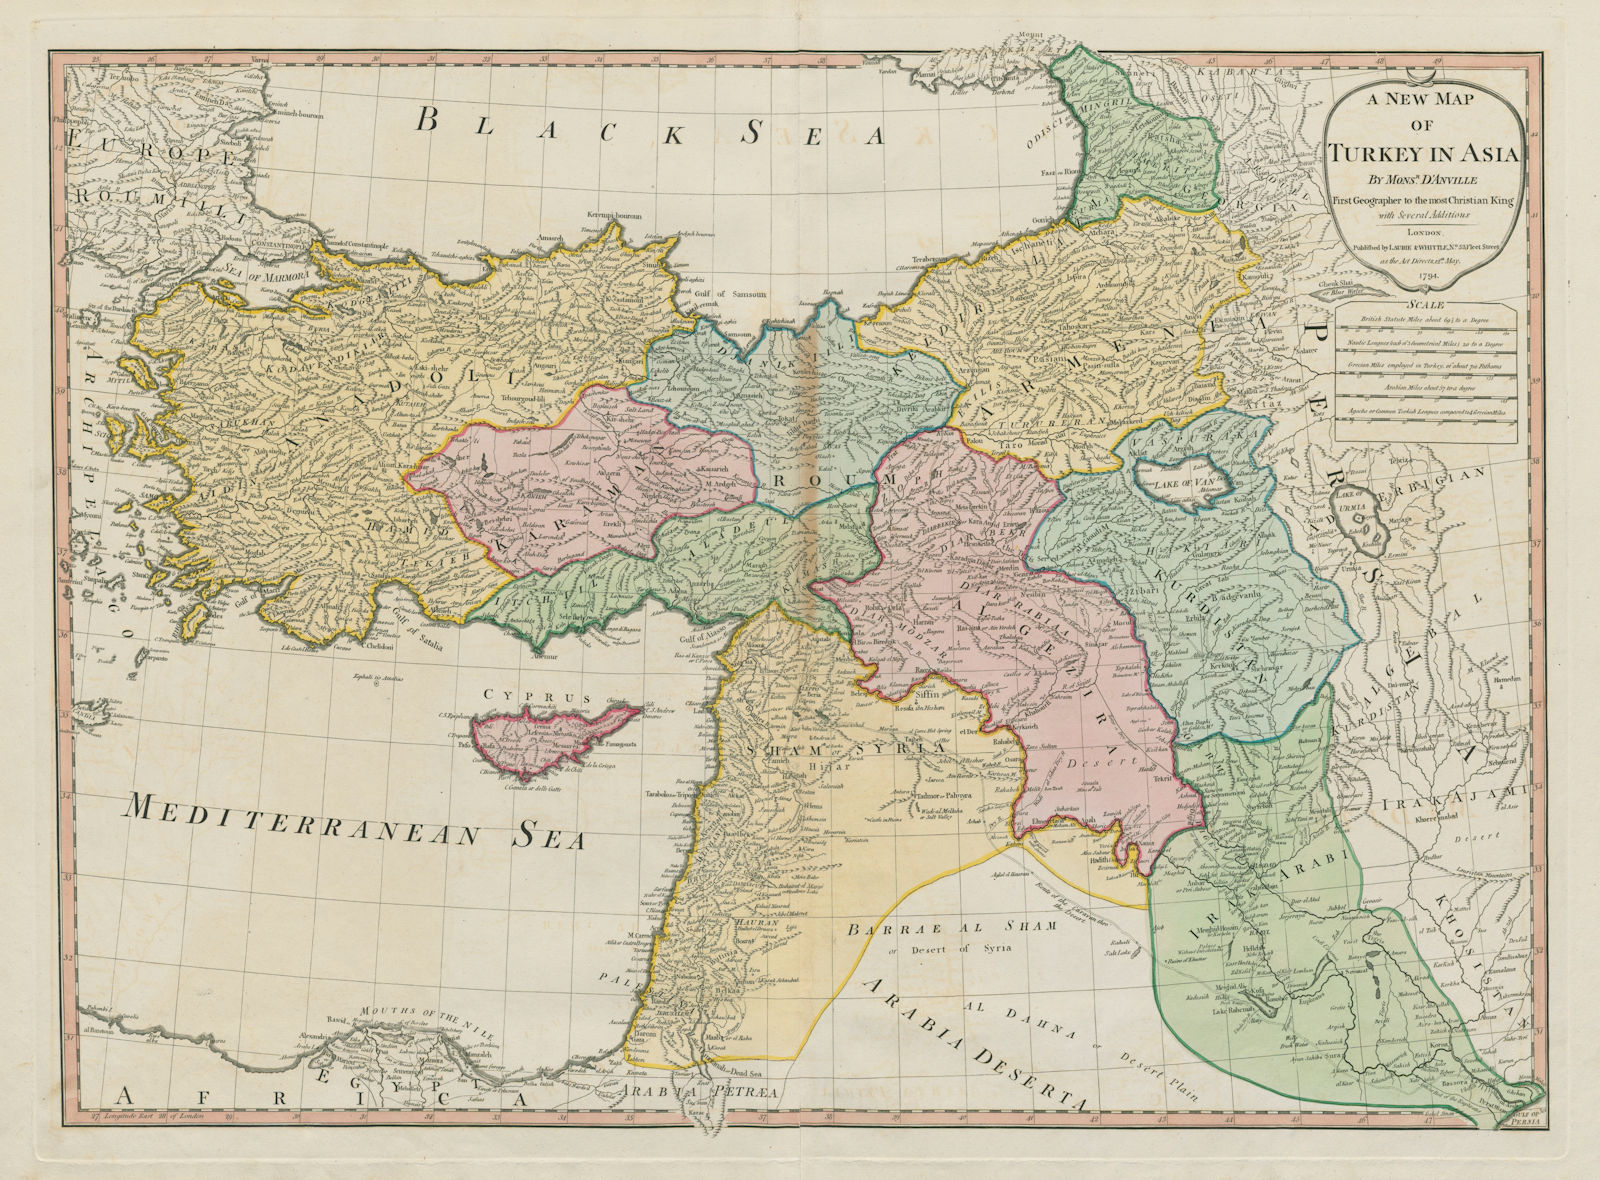 A new map of Turkey in Asia. Levant Iraq. D'ANVILLE / LAURIE & WHITTLE 1794